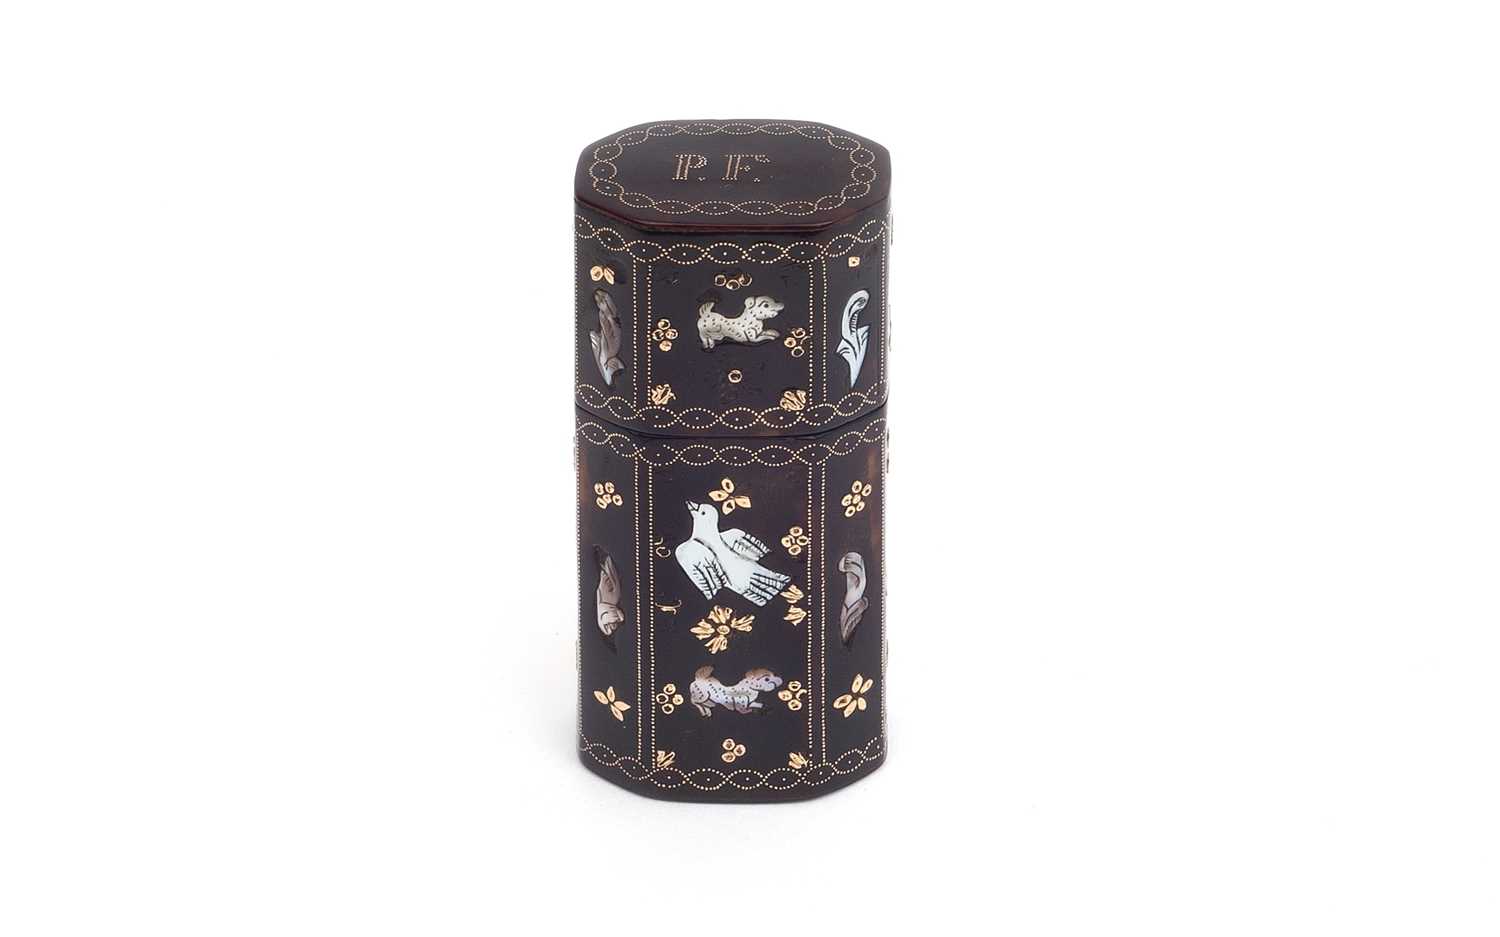 A FINE 18TH CENTURY NEAPOLITAN GOLD PIQUE AND MOTHER OF PEARL INLAID BOX